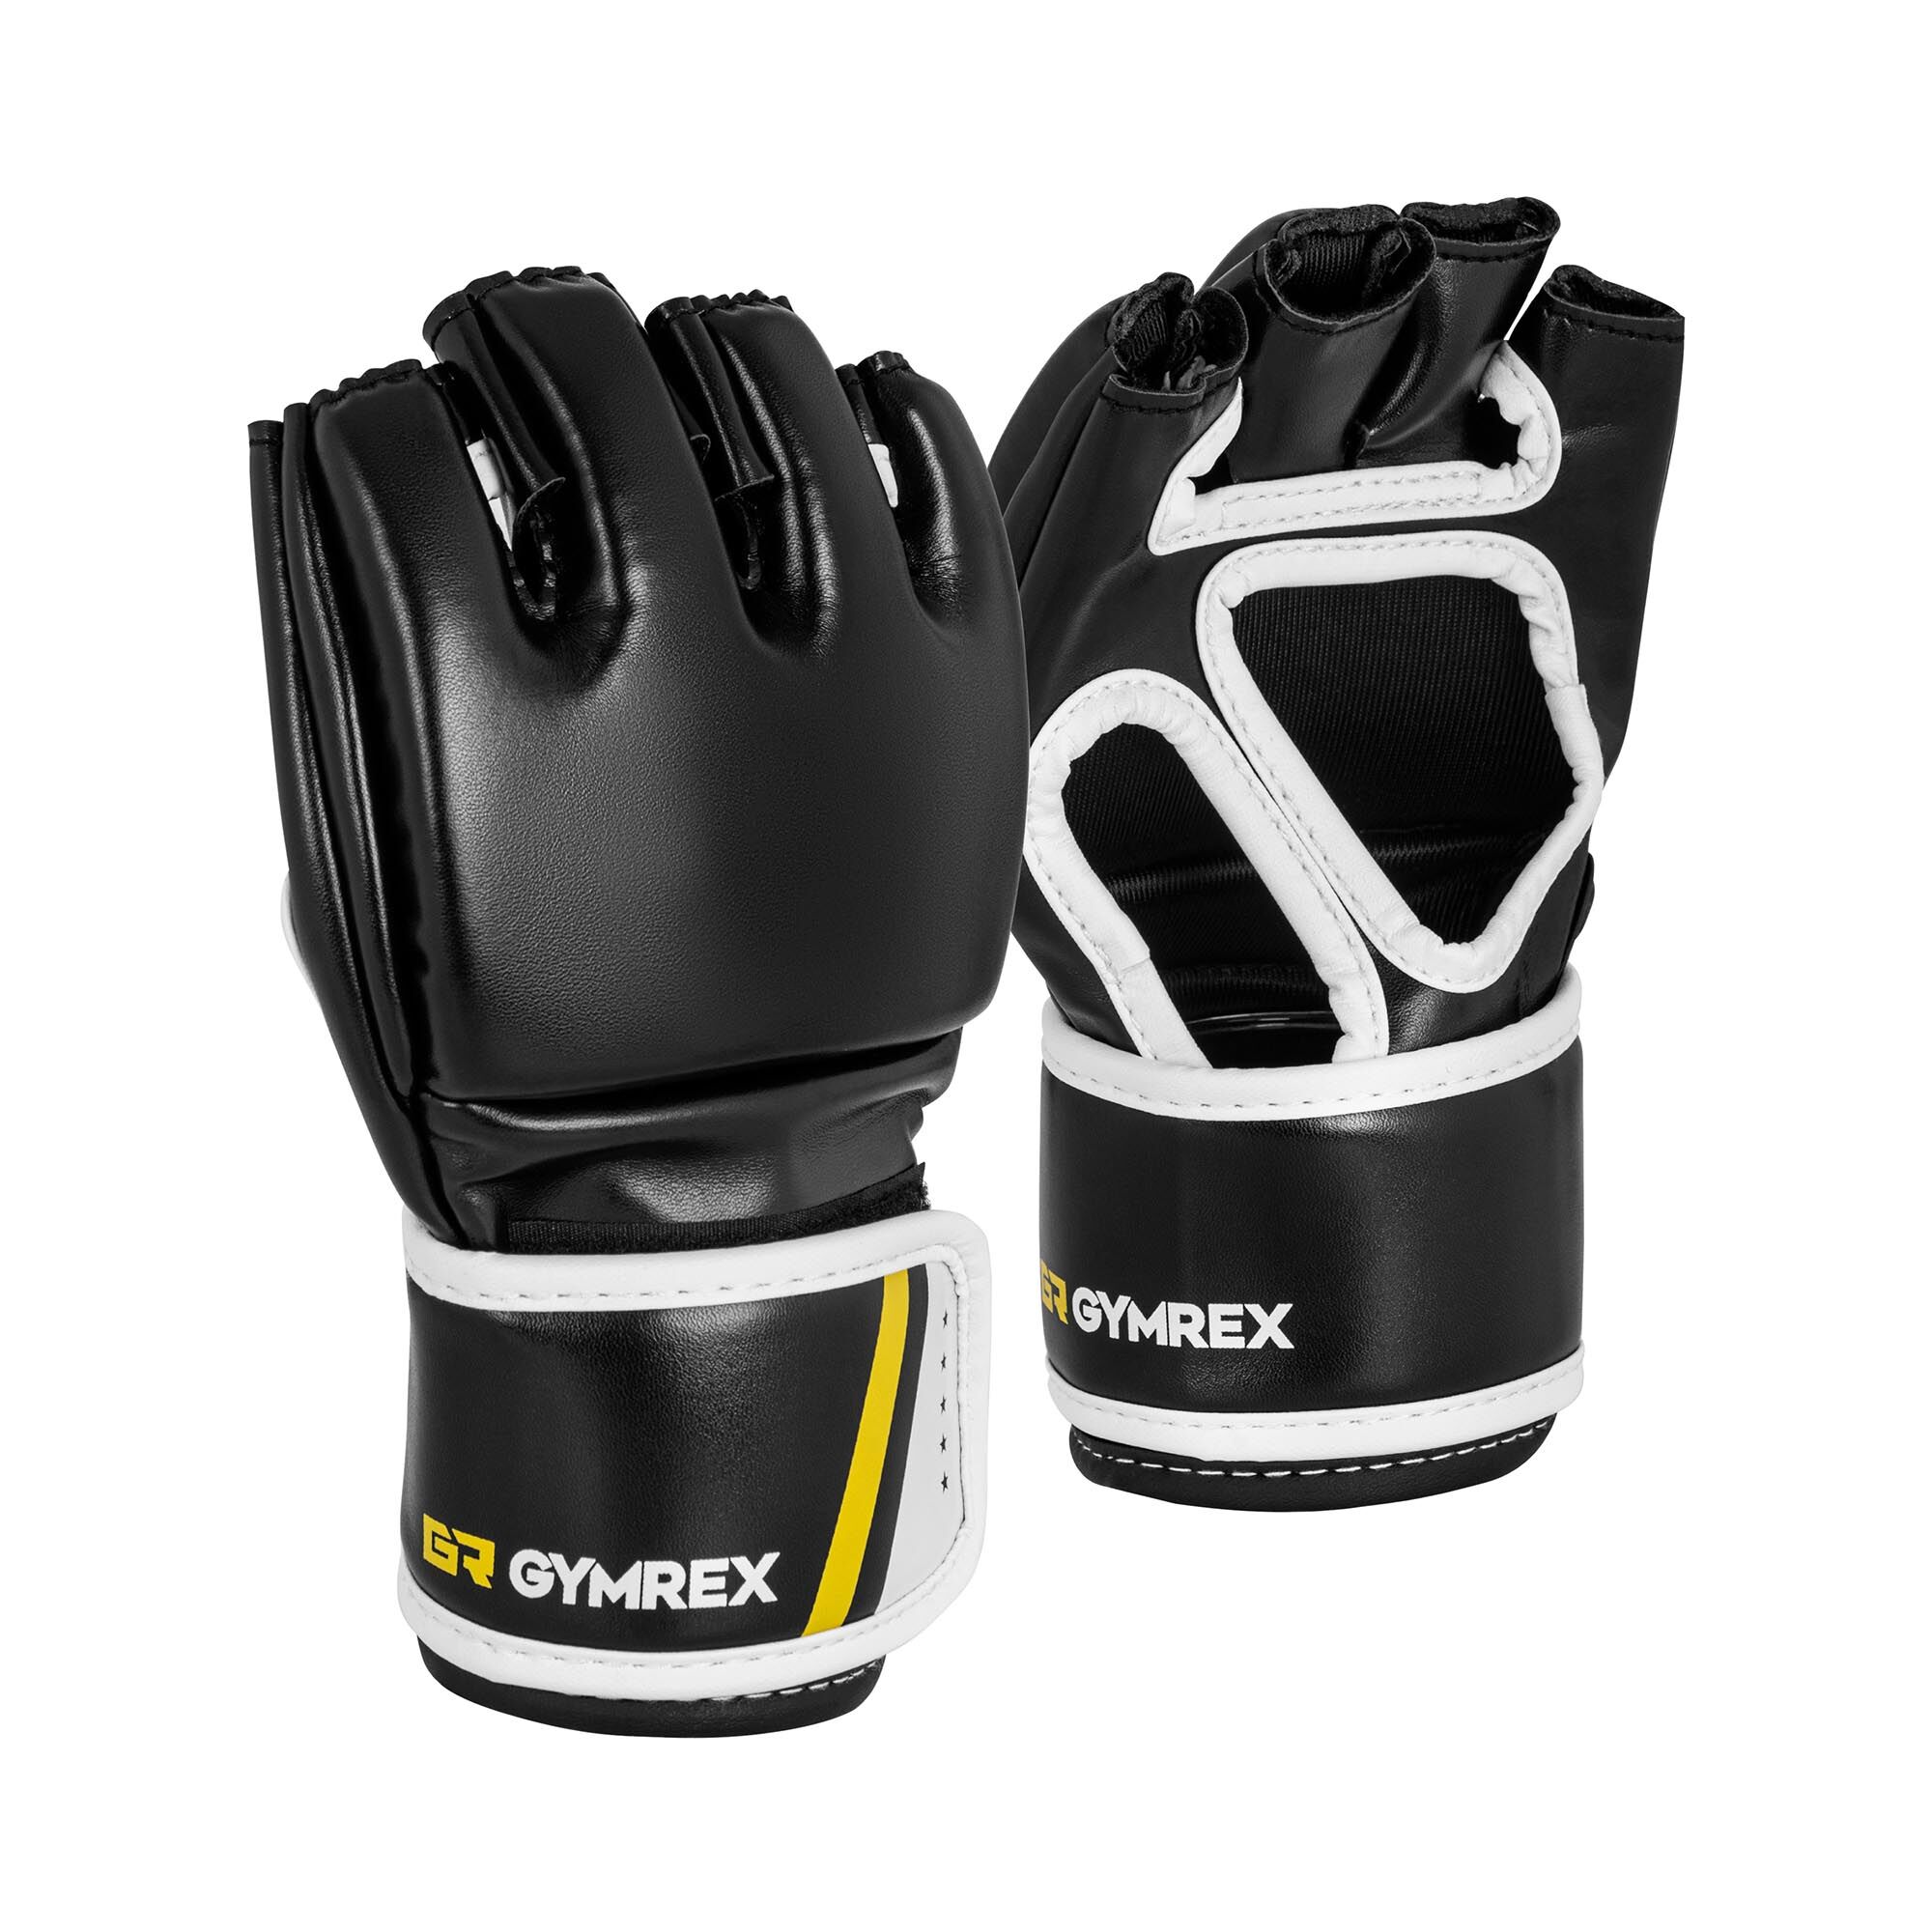 Gymrex MMA Gloves - size S/M - black - without thumbs GR-GGR S/M